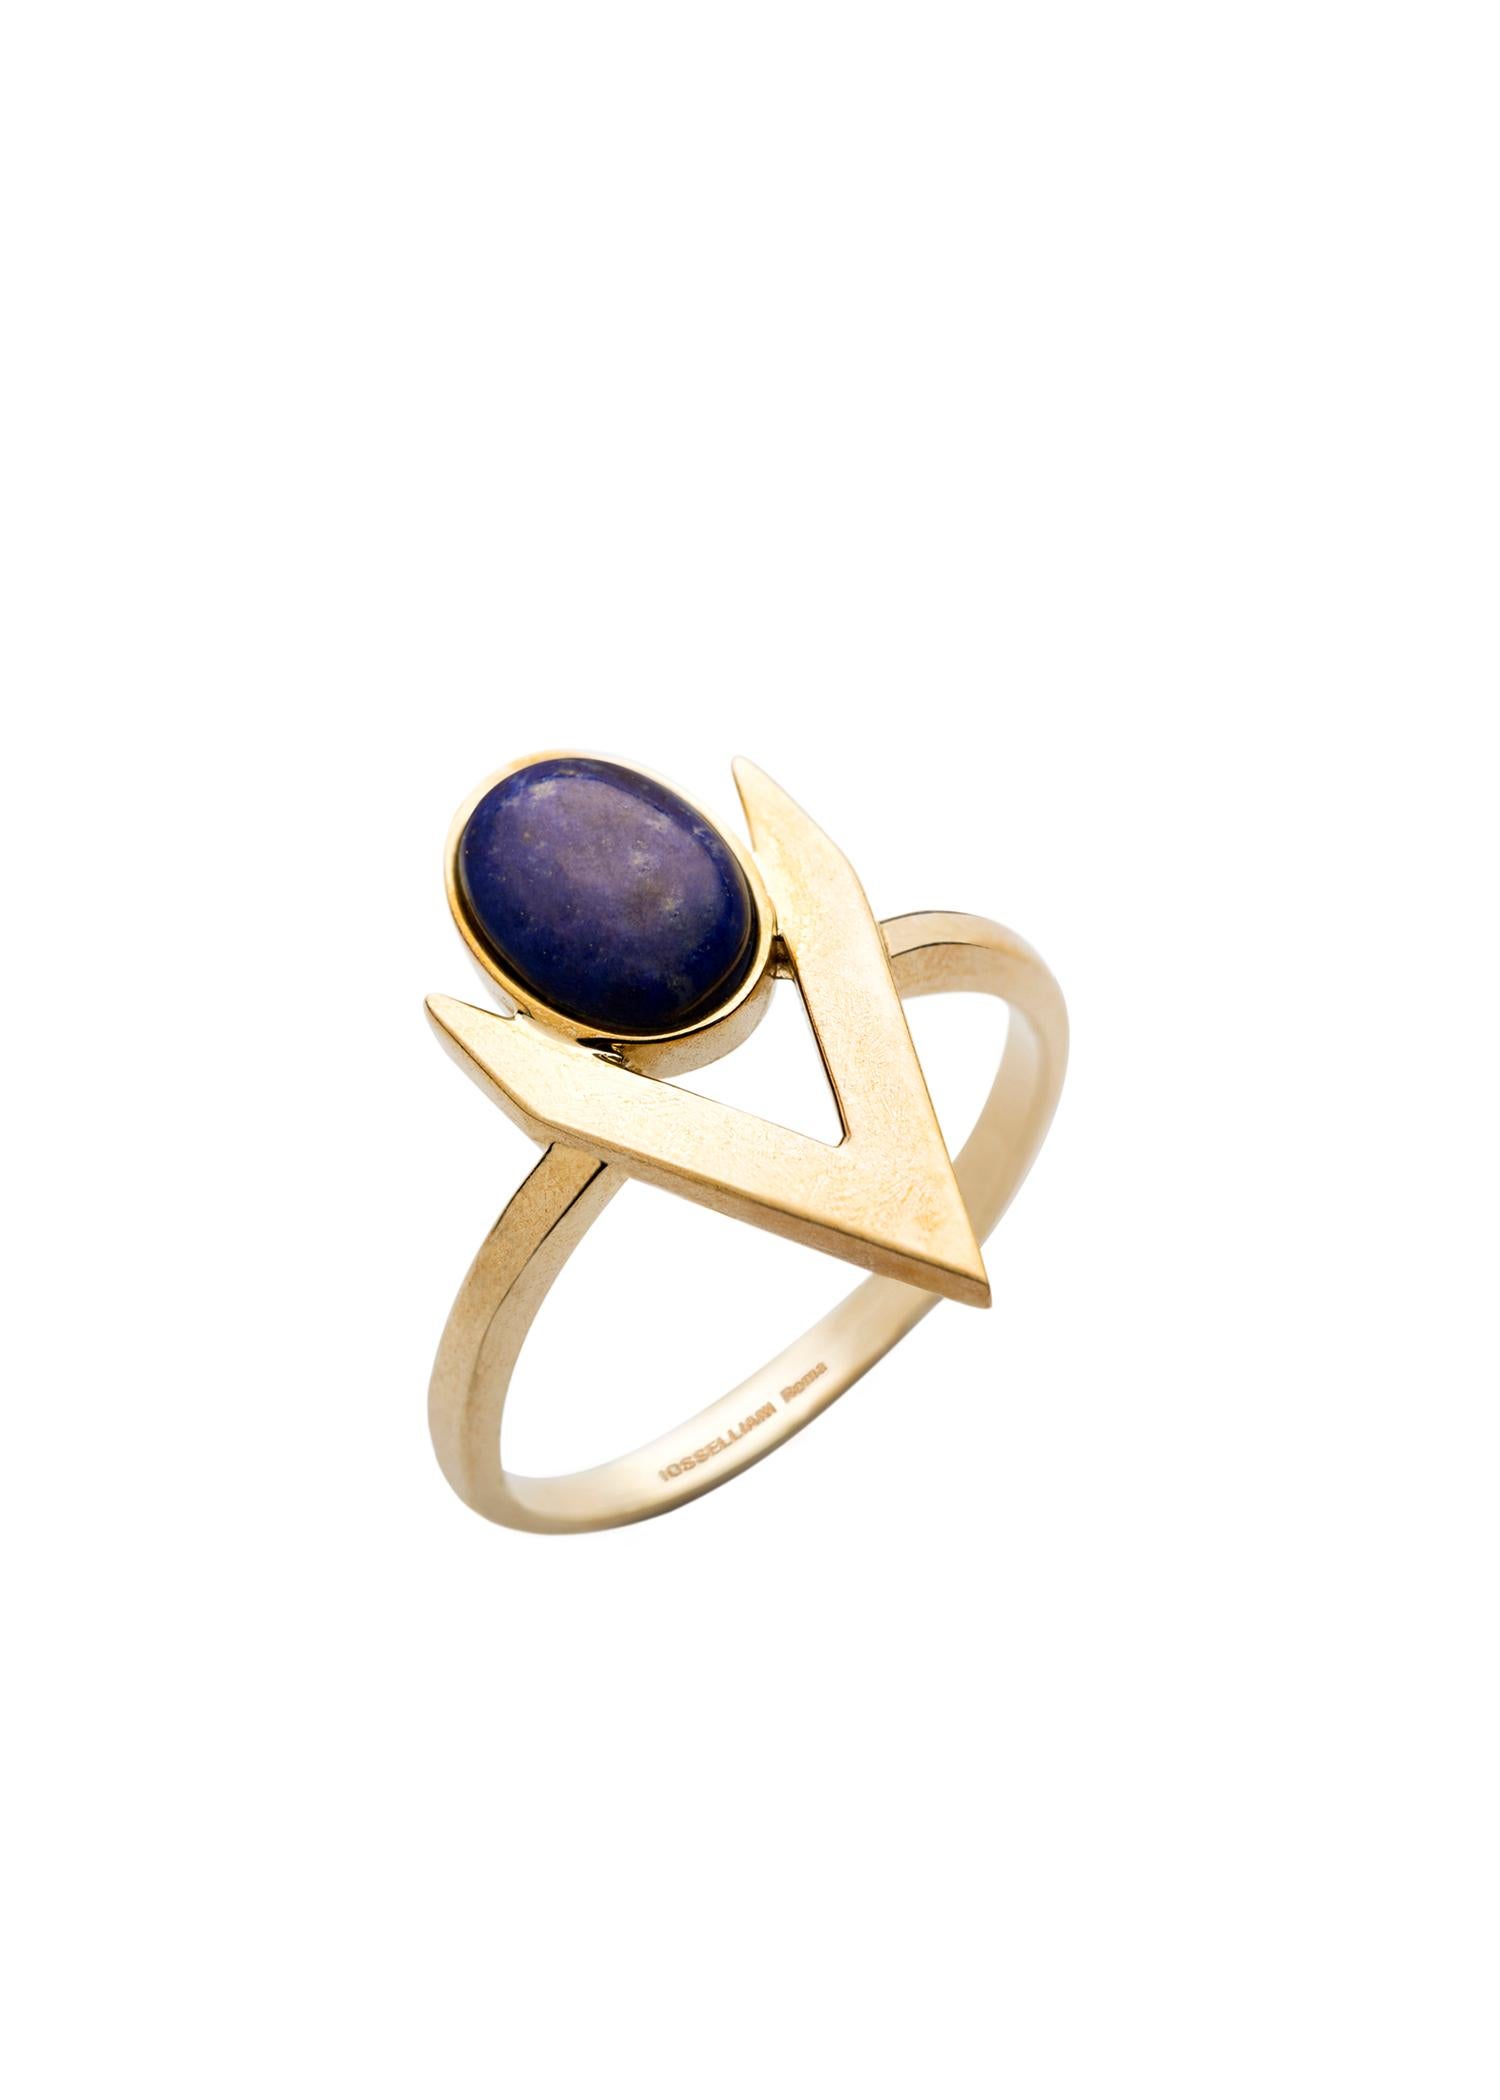 Oval Cut Gold Lapis Lazuli V-Shaped Ring from IOSSELLIANI For Sale